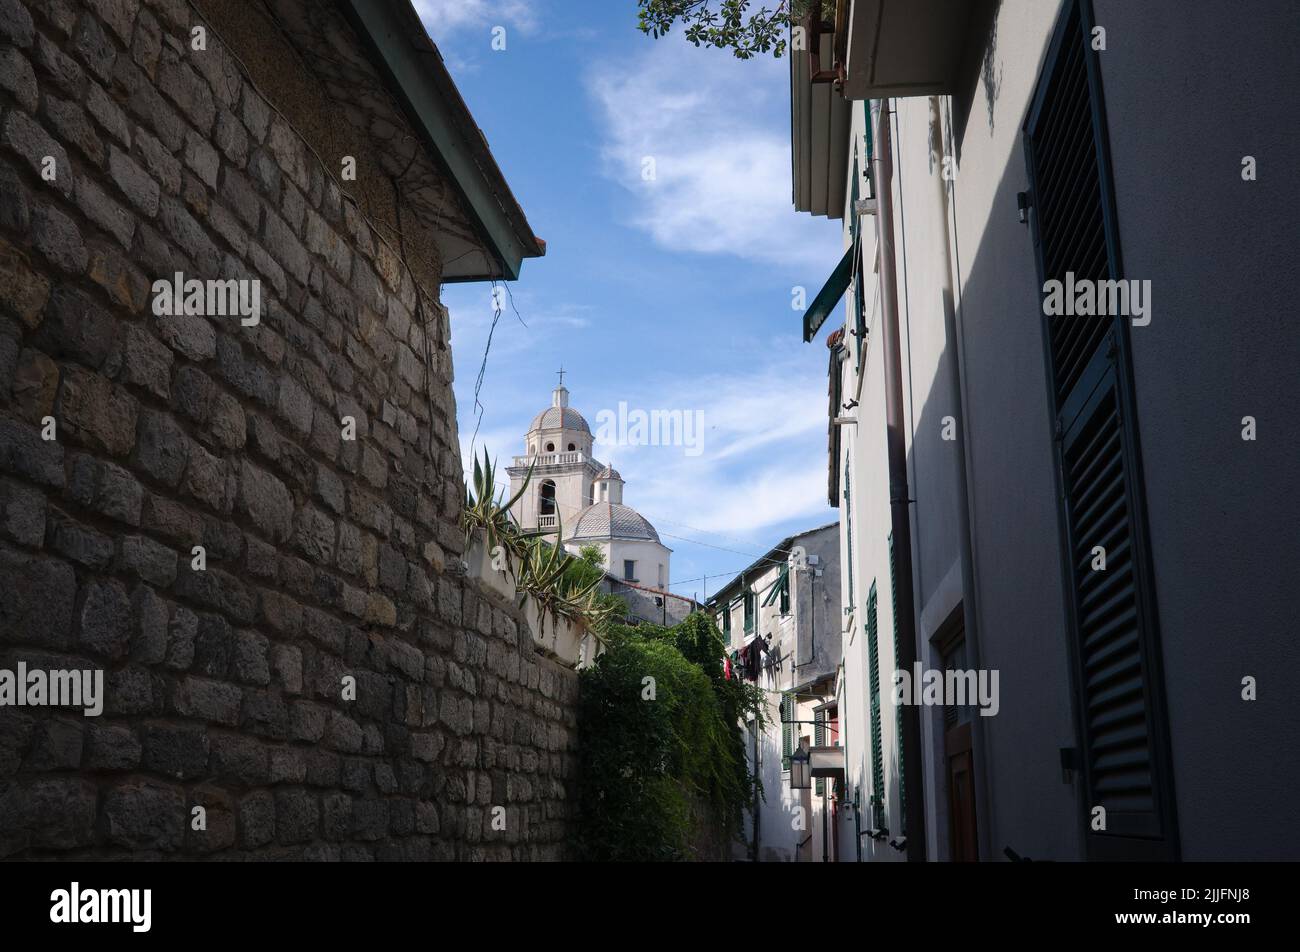 Narrow street with view to San Lorenzo church in Porto Venere, Liguria, Italy. Passage between stone wall and Italian houses with shutters on windows. Stock Photo